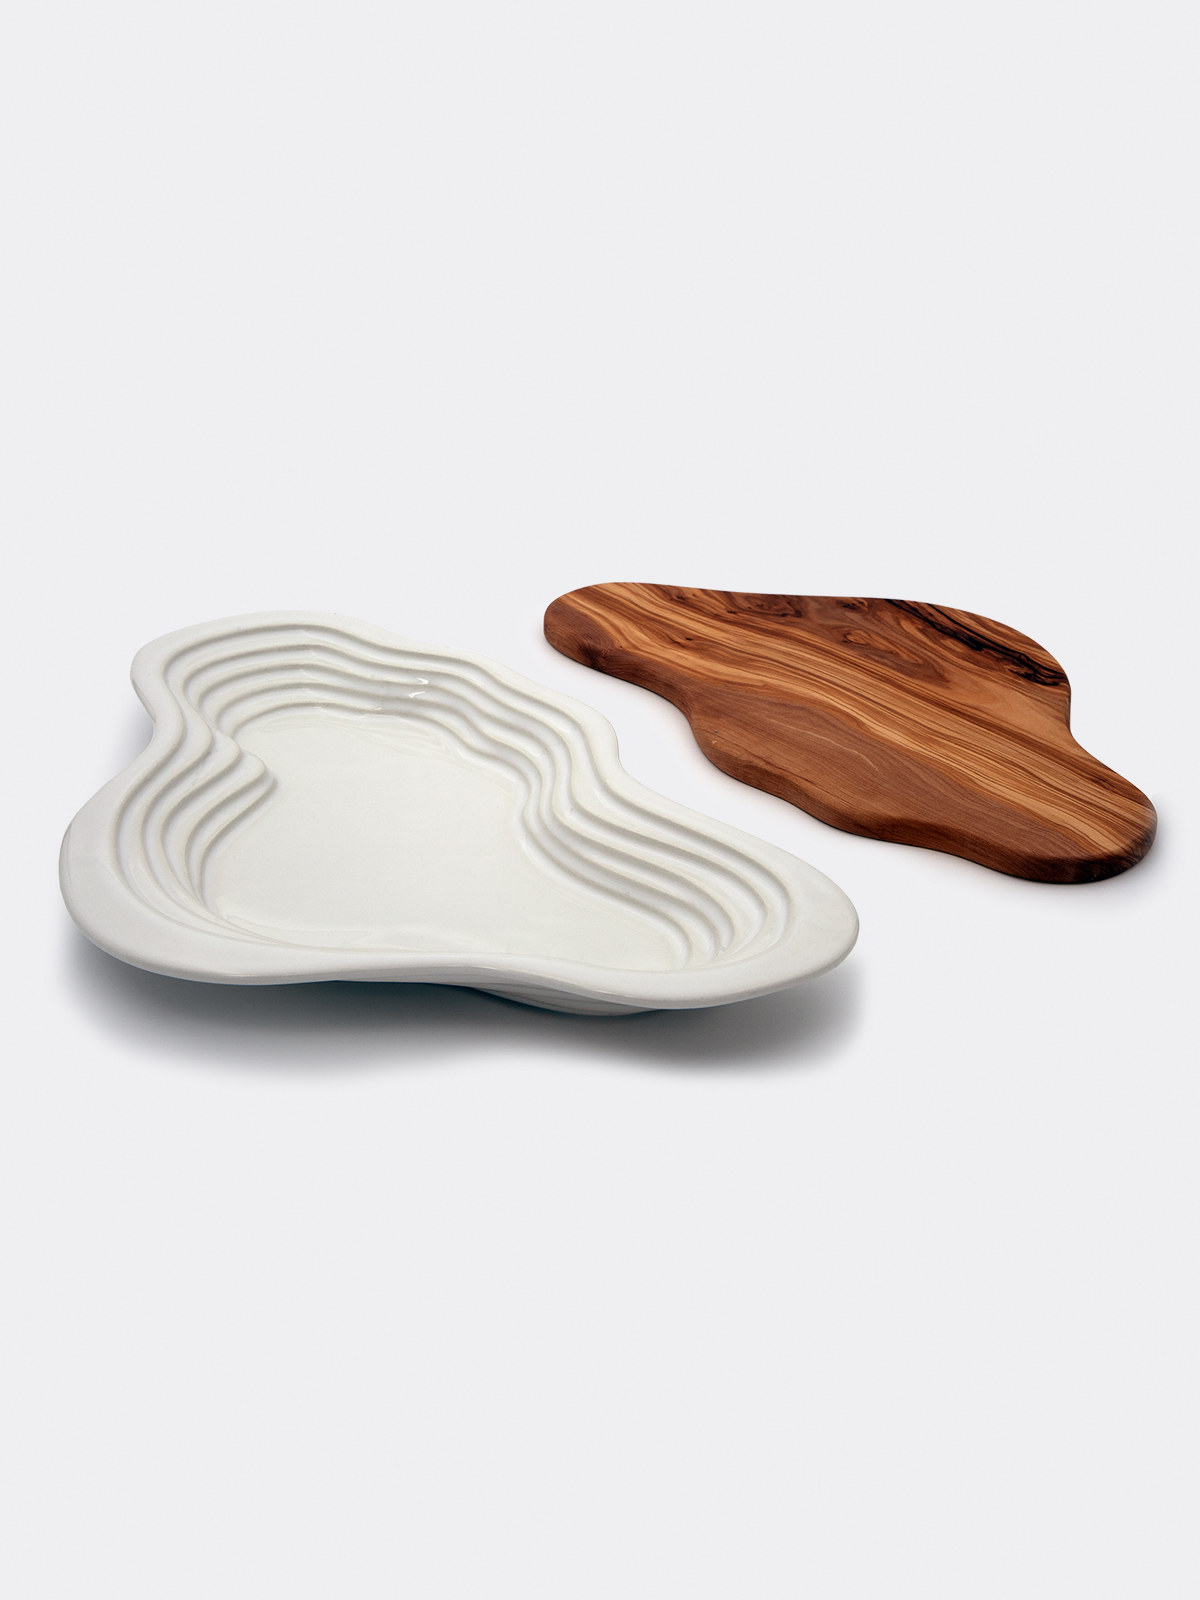 Laboratorio D’Estorias Two-piece set for serving food in stoneware and olive wood, representation of portuguese olive tree landscape